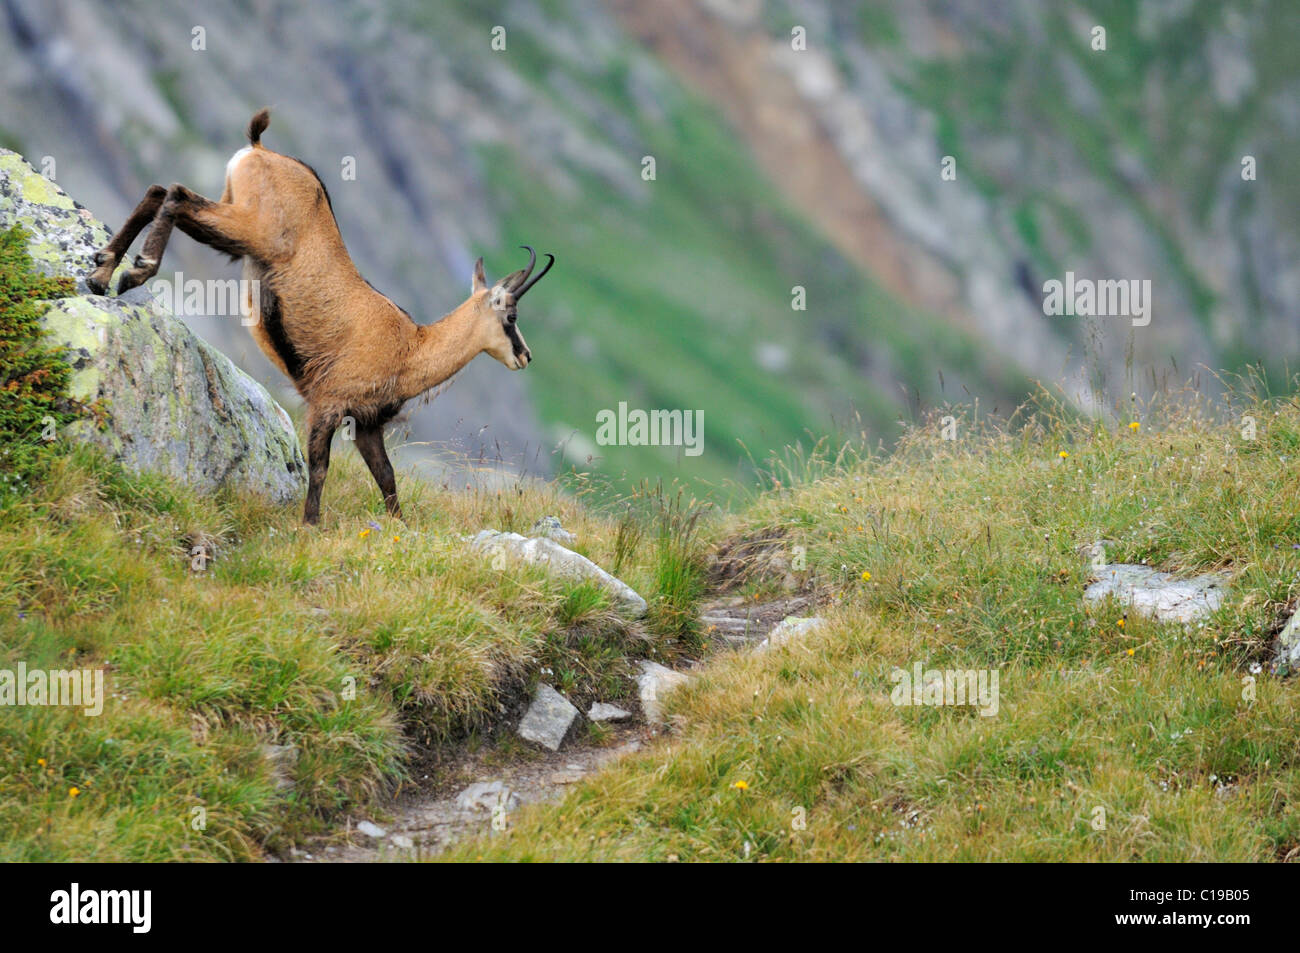 Chamois (Rupicapra rupicapra) jumping from a rock Stock Photo